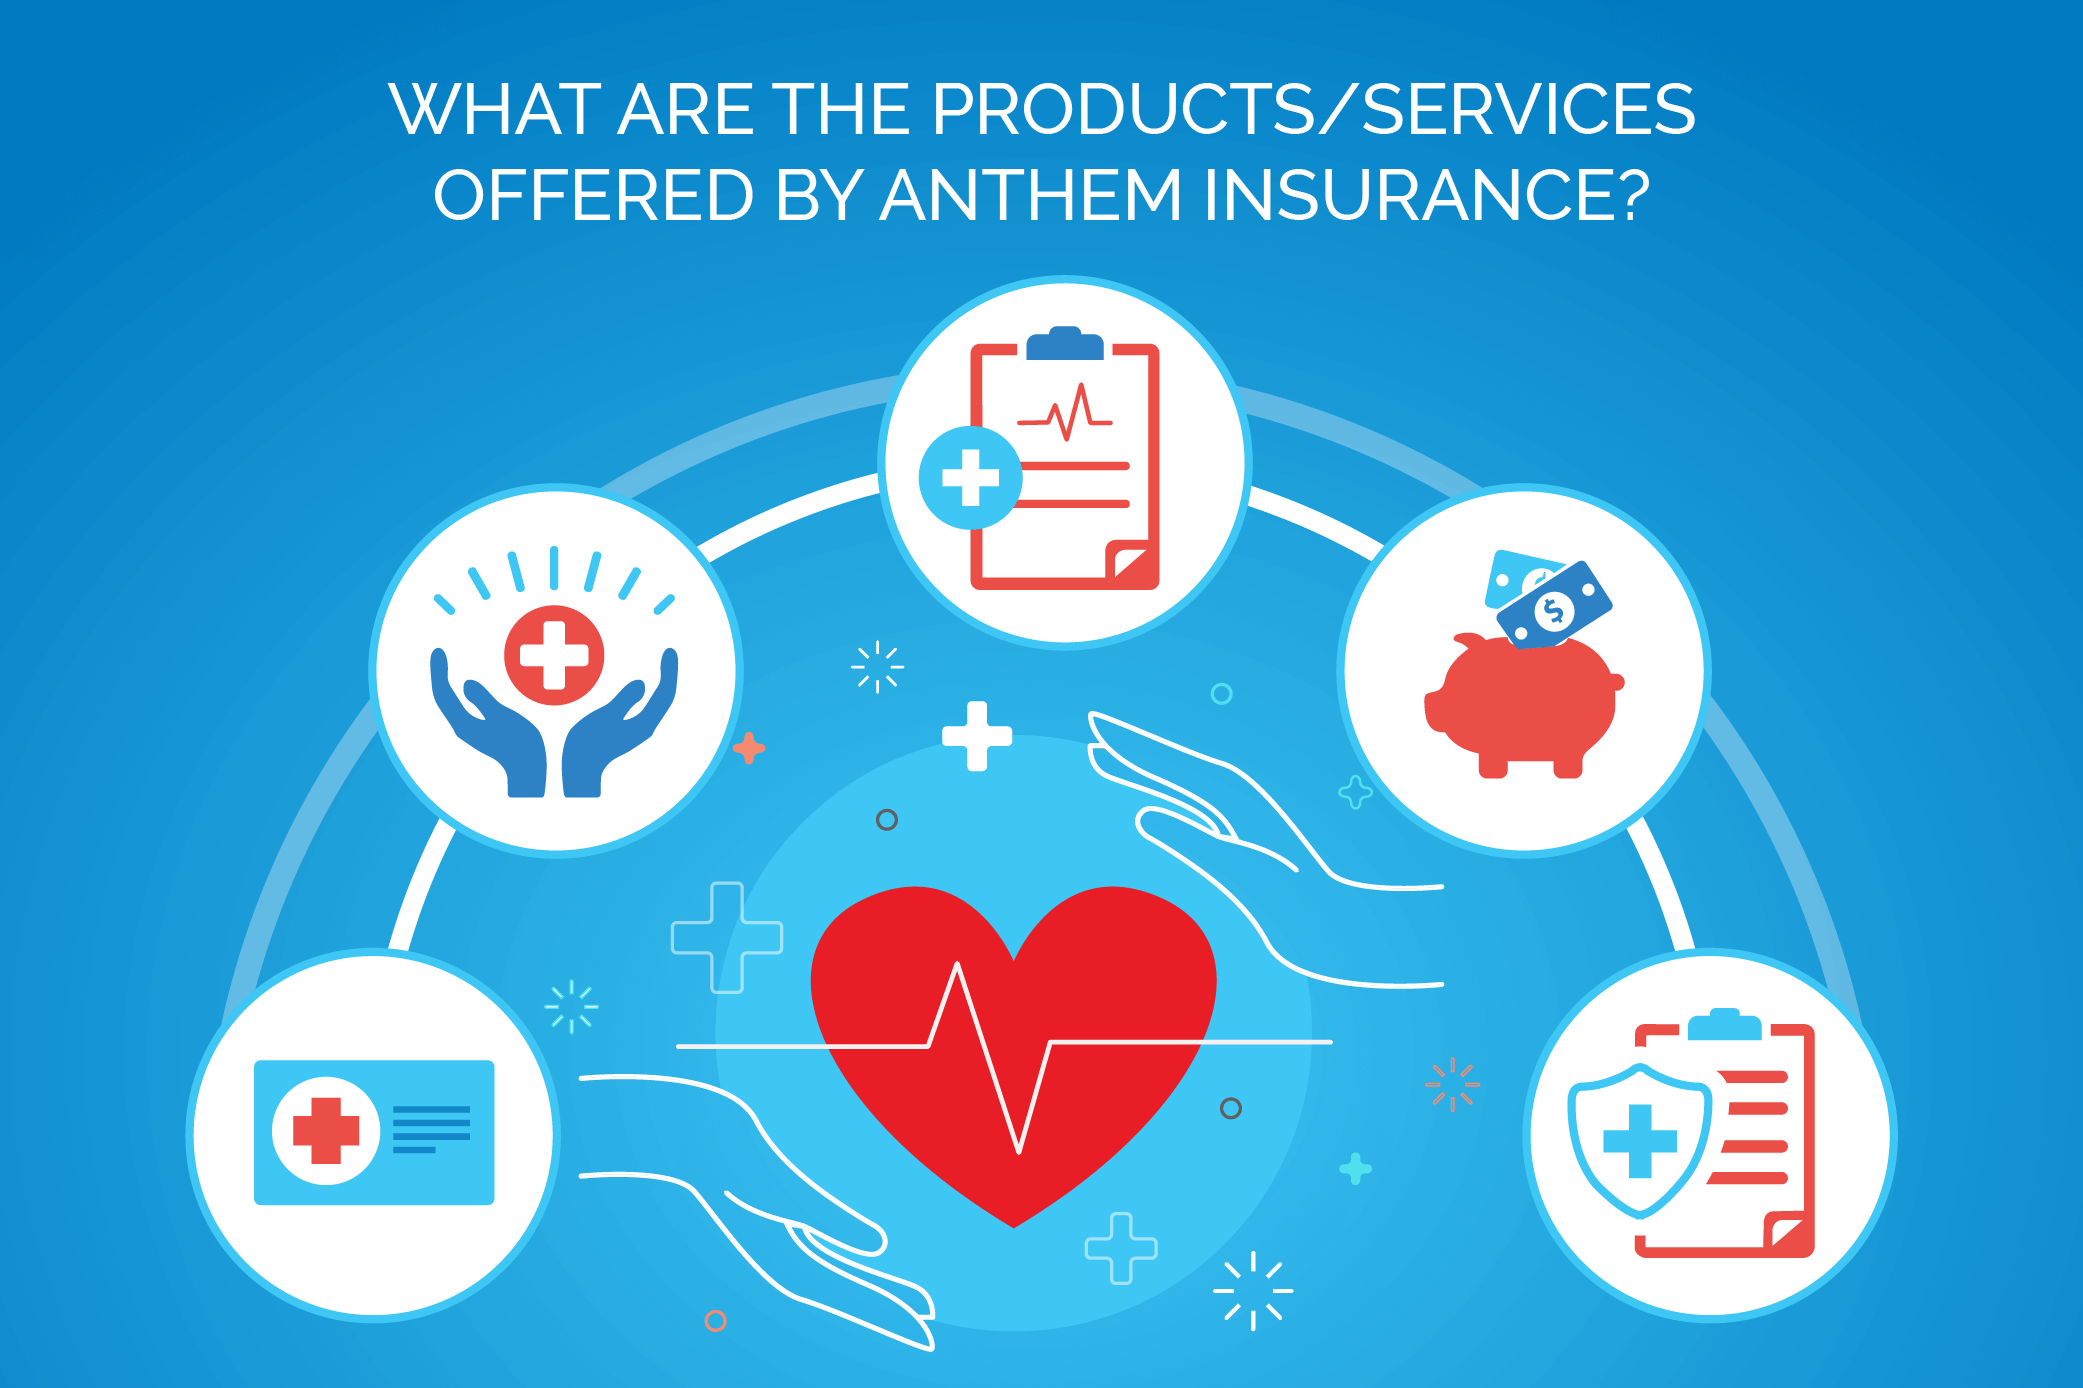 anthem health insurance for small business